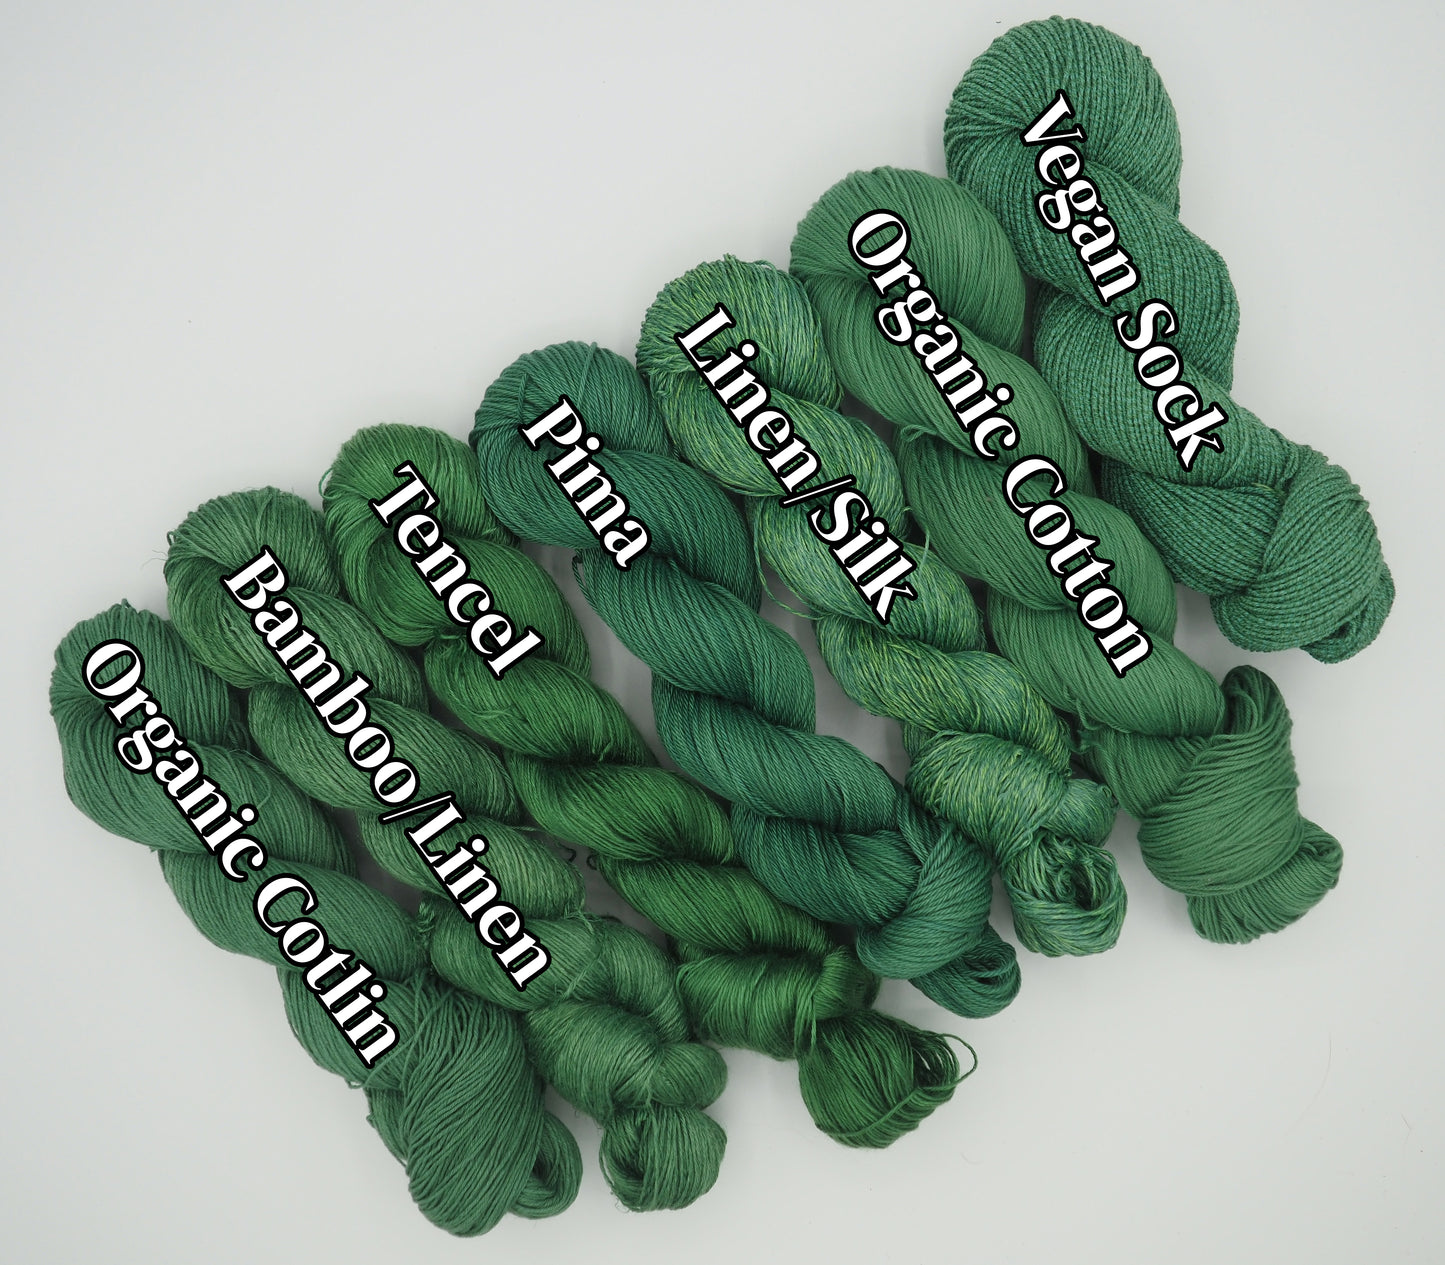 Greenery - Dyed to Order - *Please allow 4-6 weeks for dyeing*